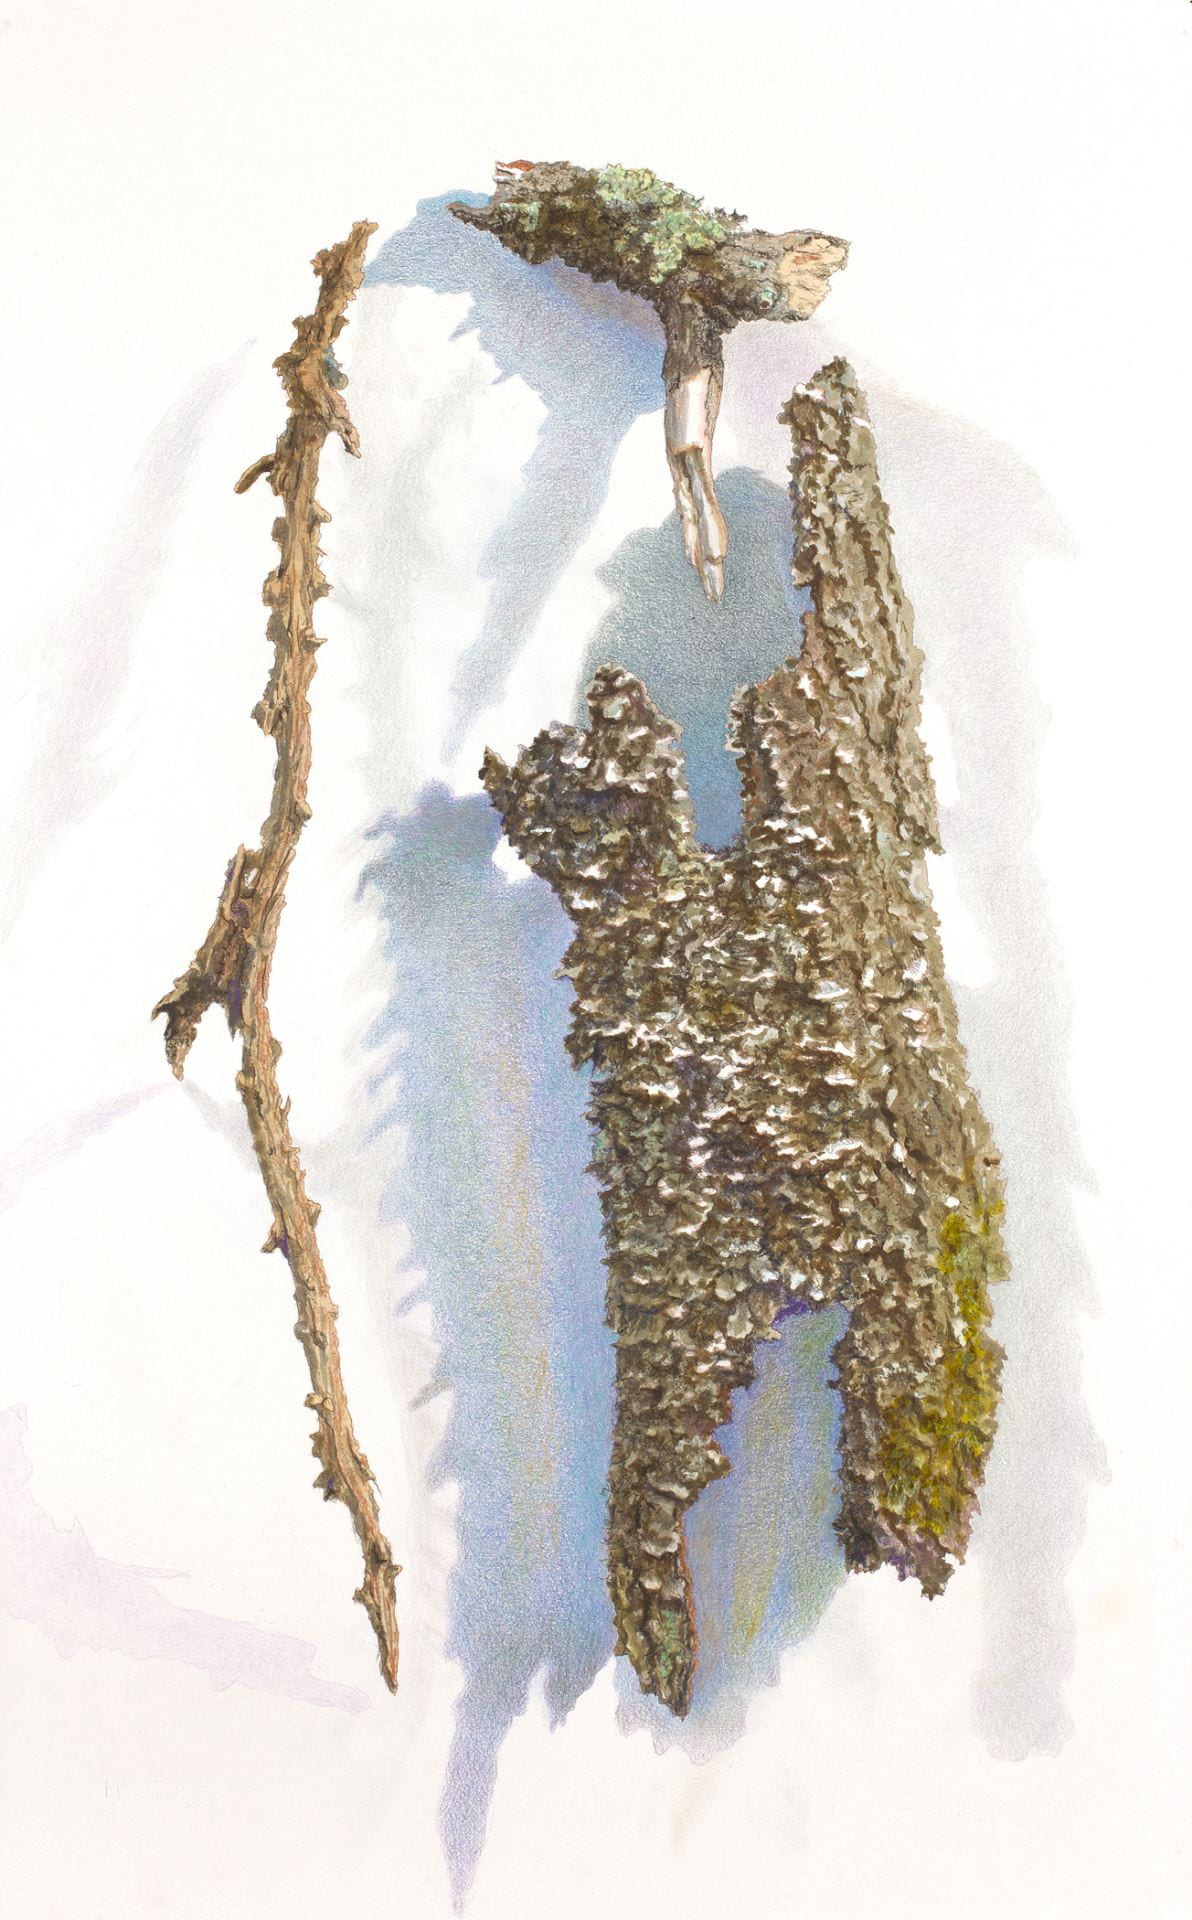 drawing and painting of a composition of stick and bark